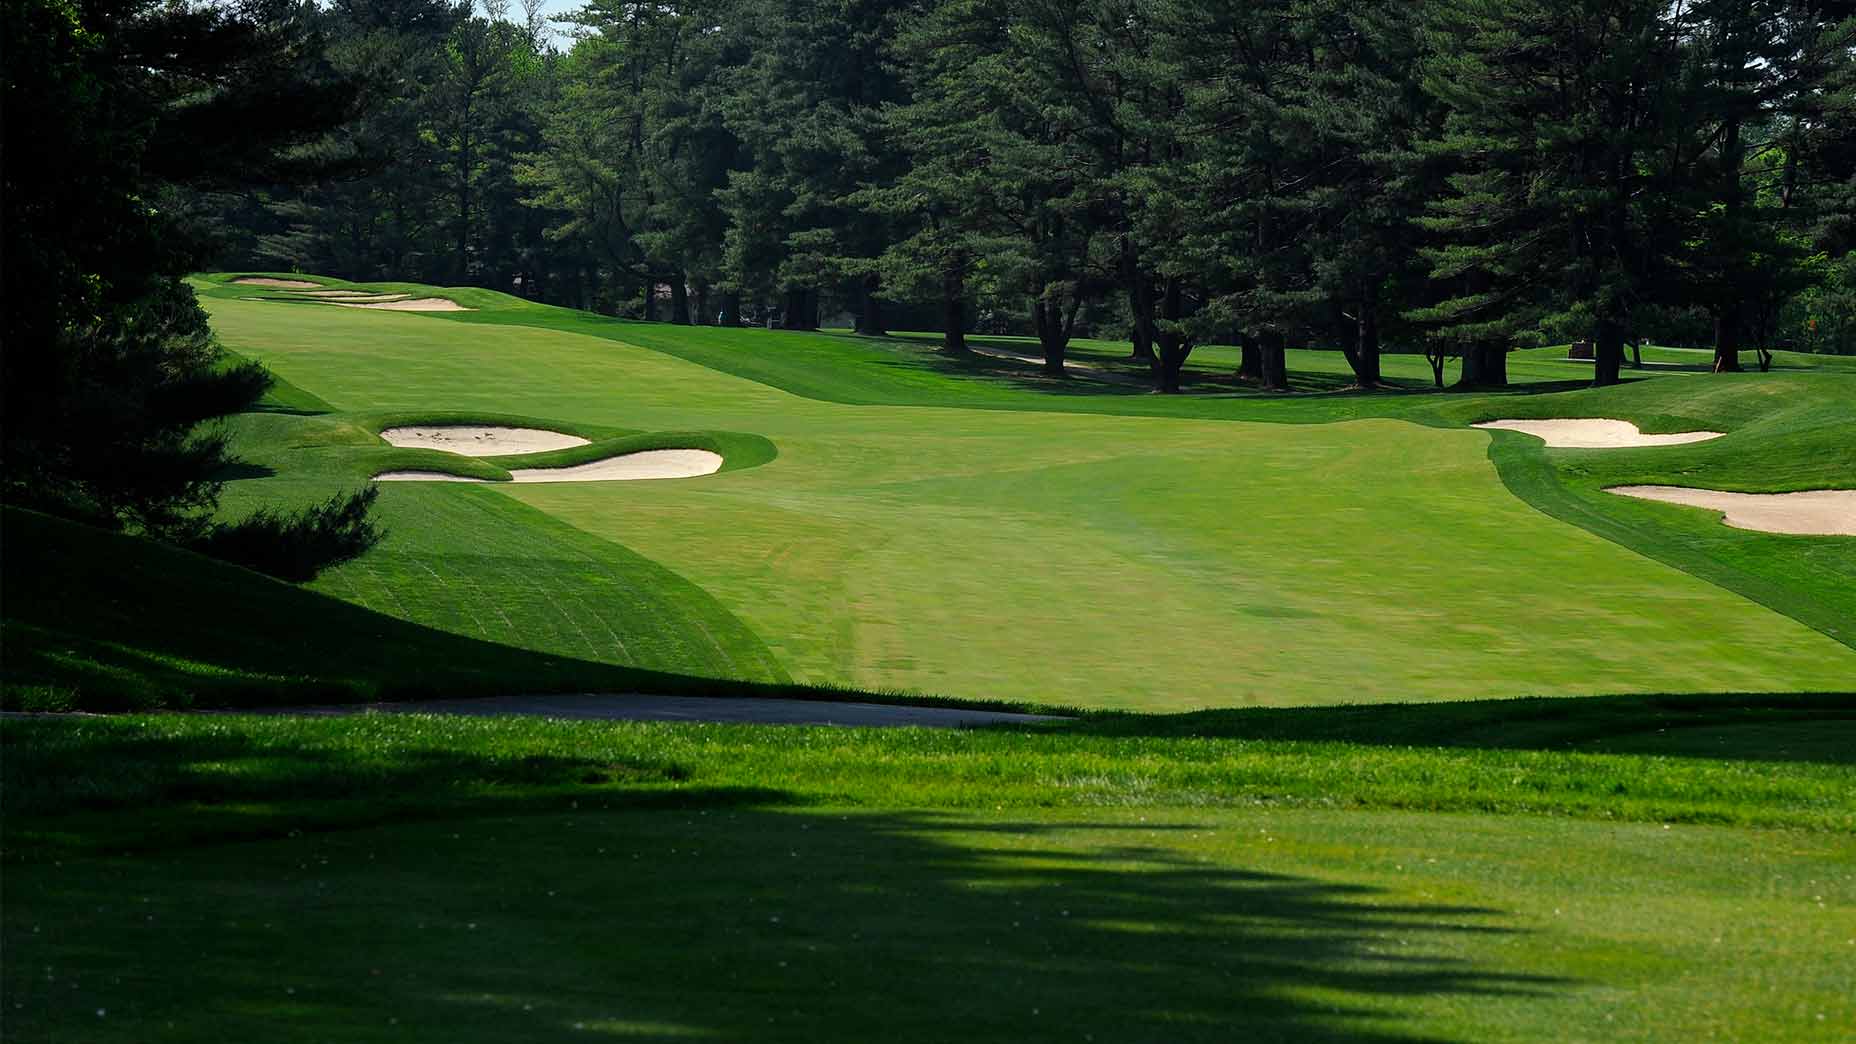 Best golf courses in Maryland, according to GOLF Magazine’s expert course raters